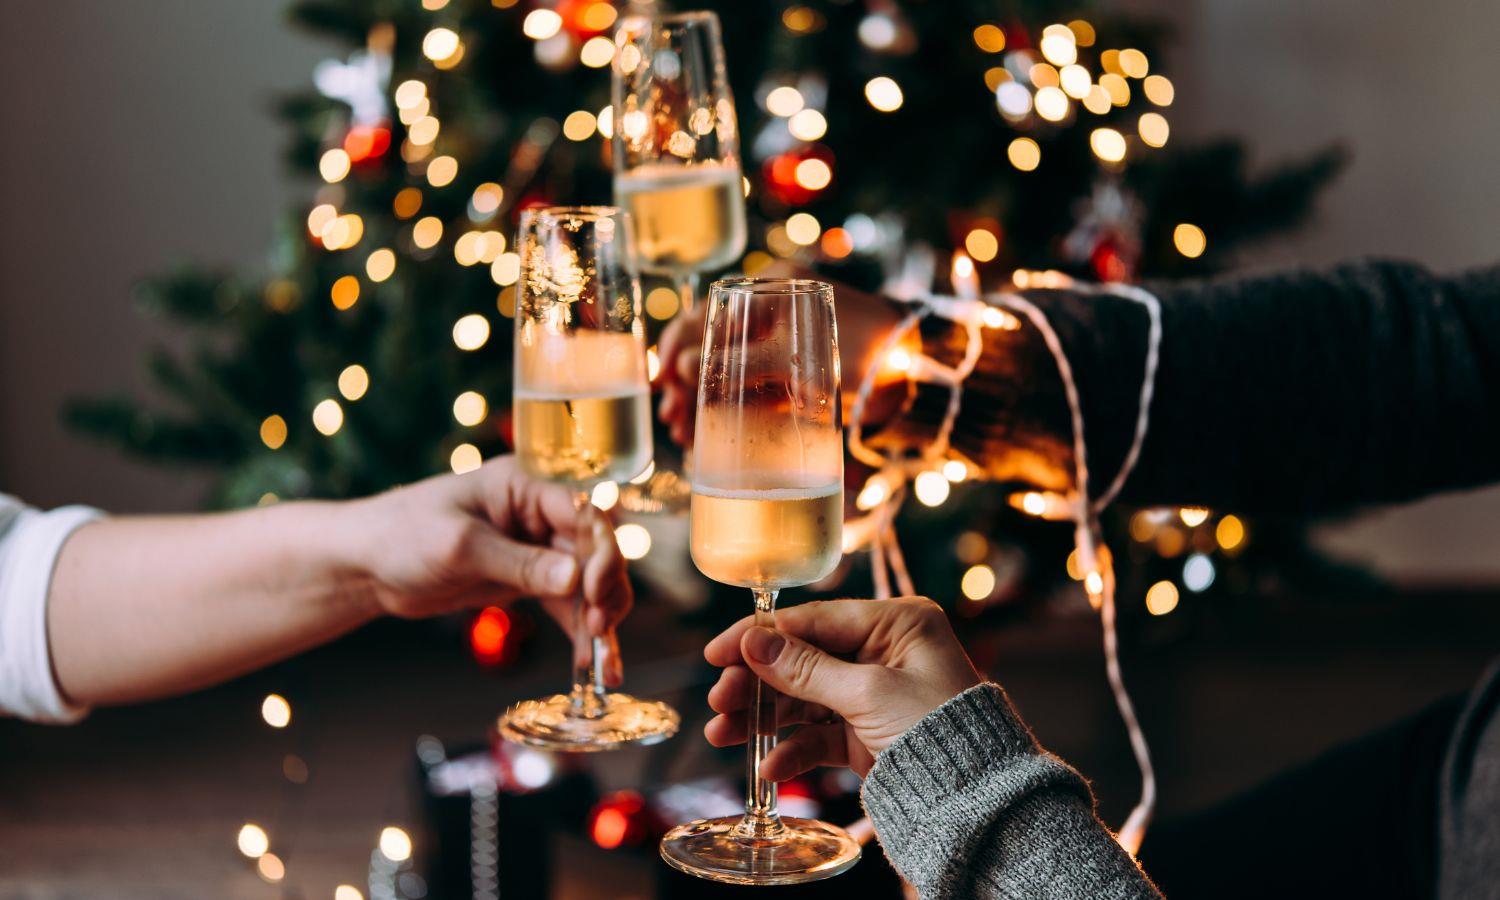 Hands clinking glasses of Champagne in front of a Christmas tree